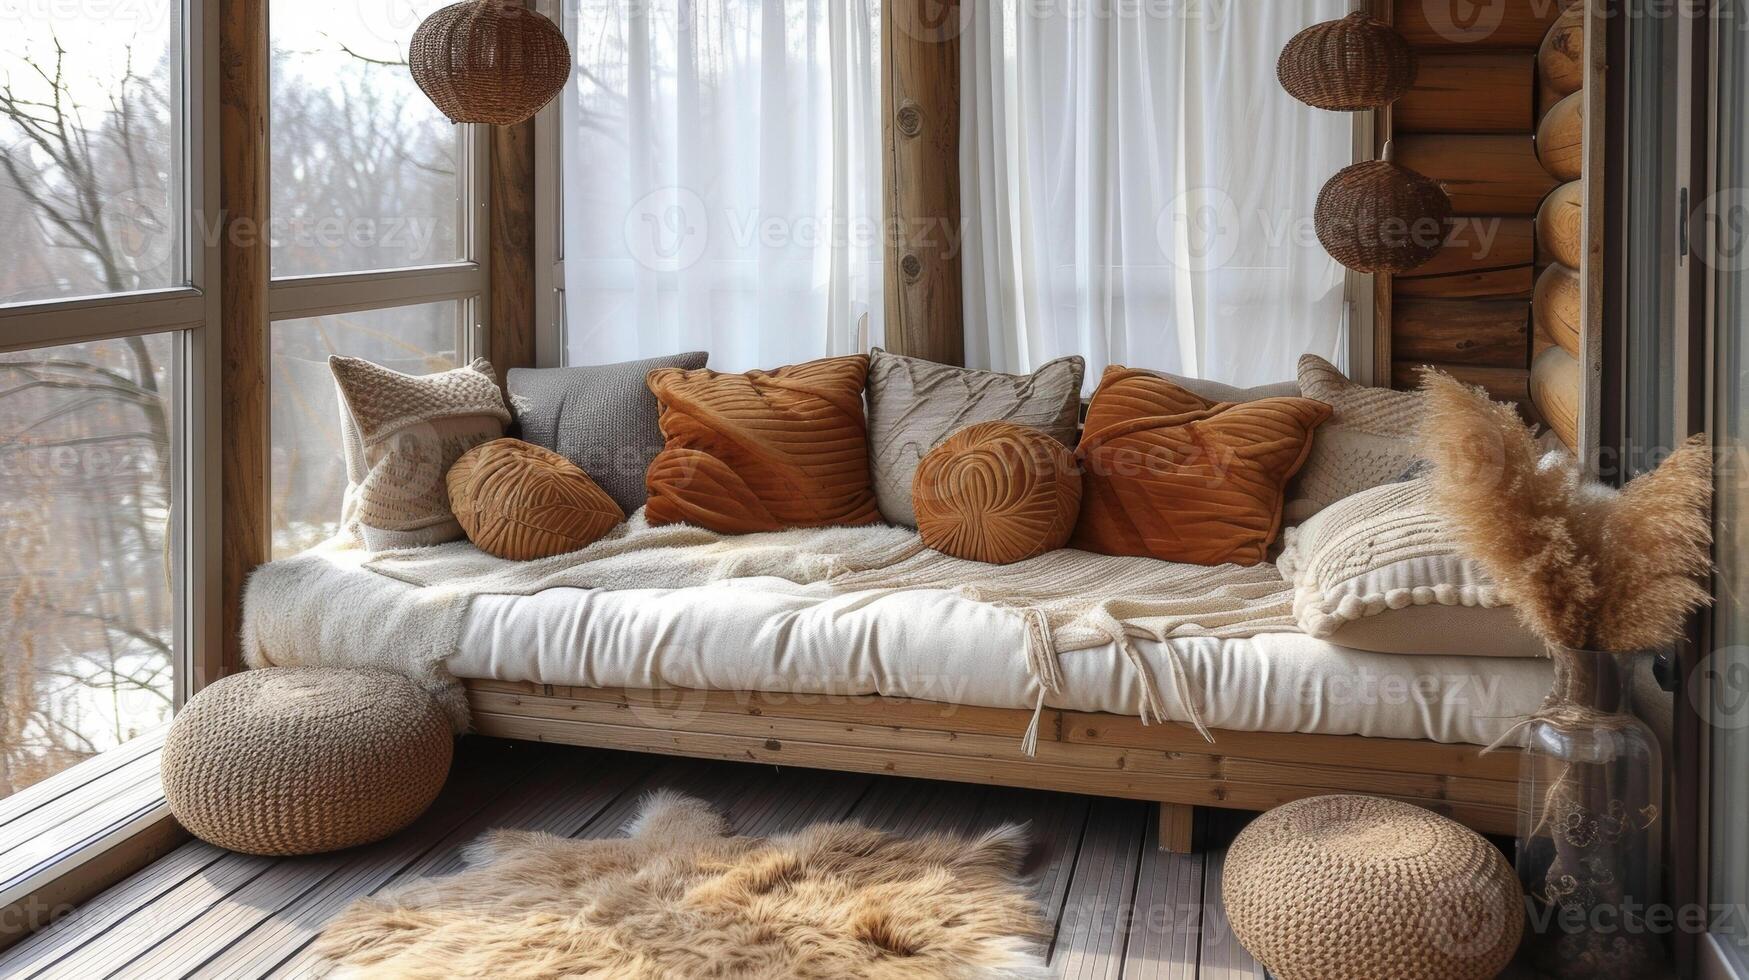 A sophisticated balcony with a chic daybed elegantly dd with white curtains and adorned with plush cushions and a faux fur throw for ultimate comfort photo